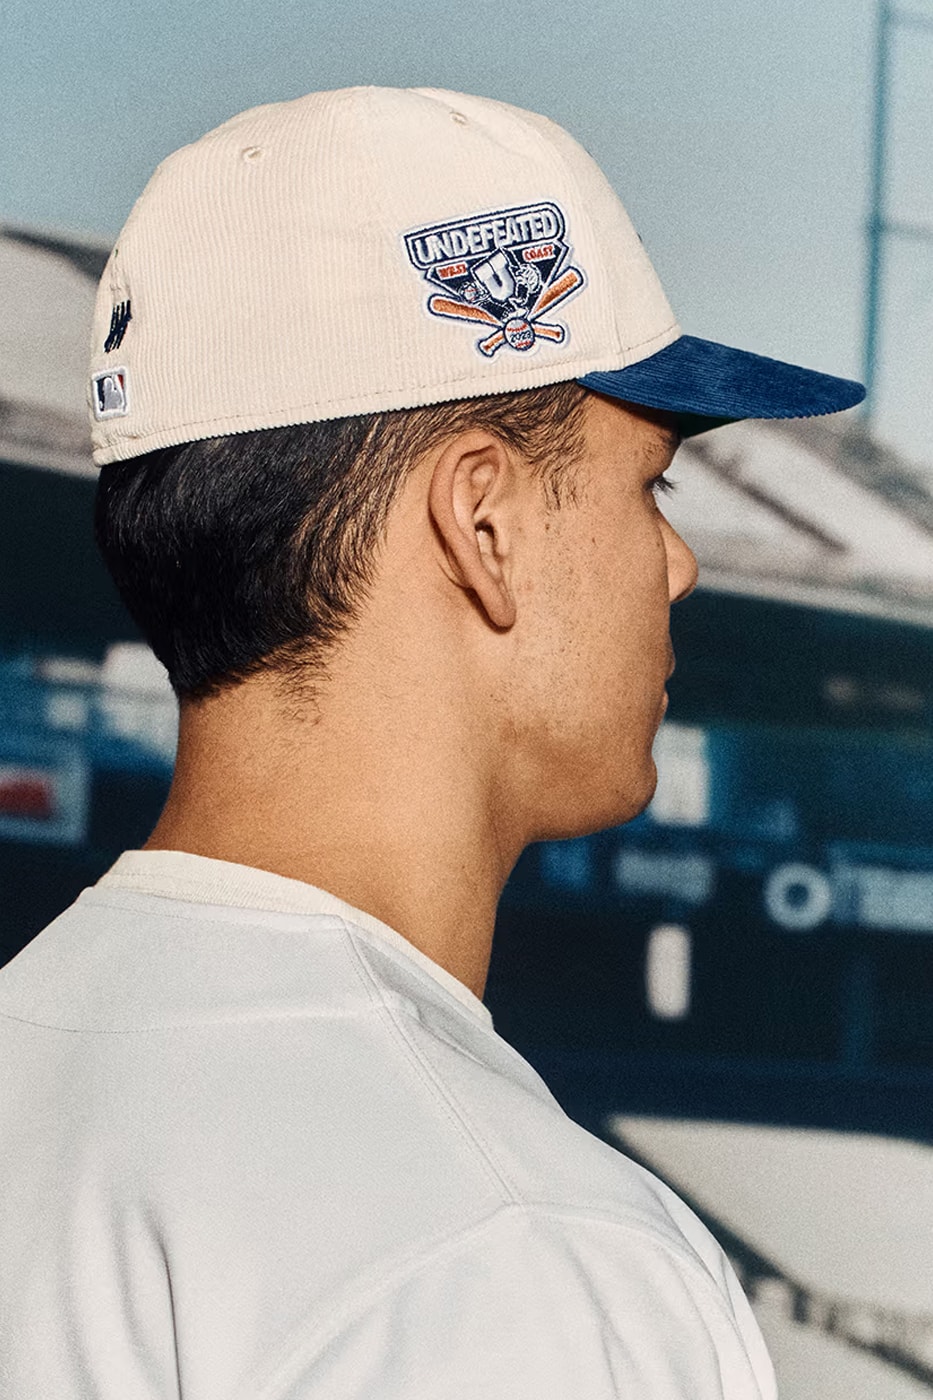 UNDEFEATED x Los Angeles Dodgers x New Era 59FIFTY 联名系列帽款發佈